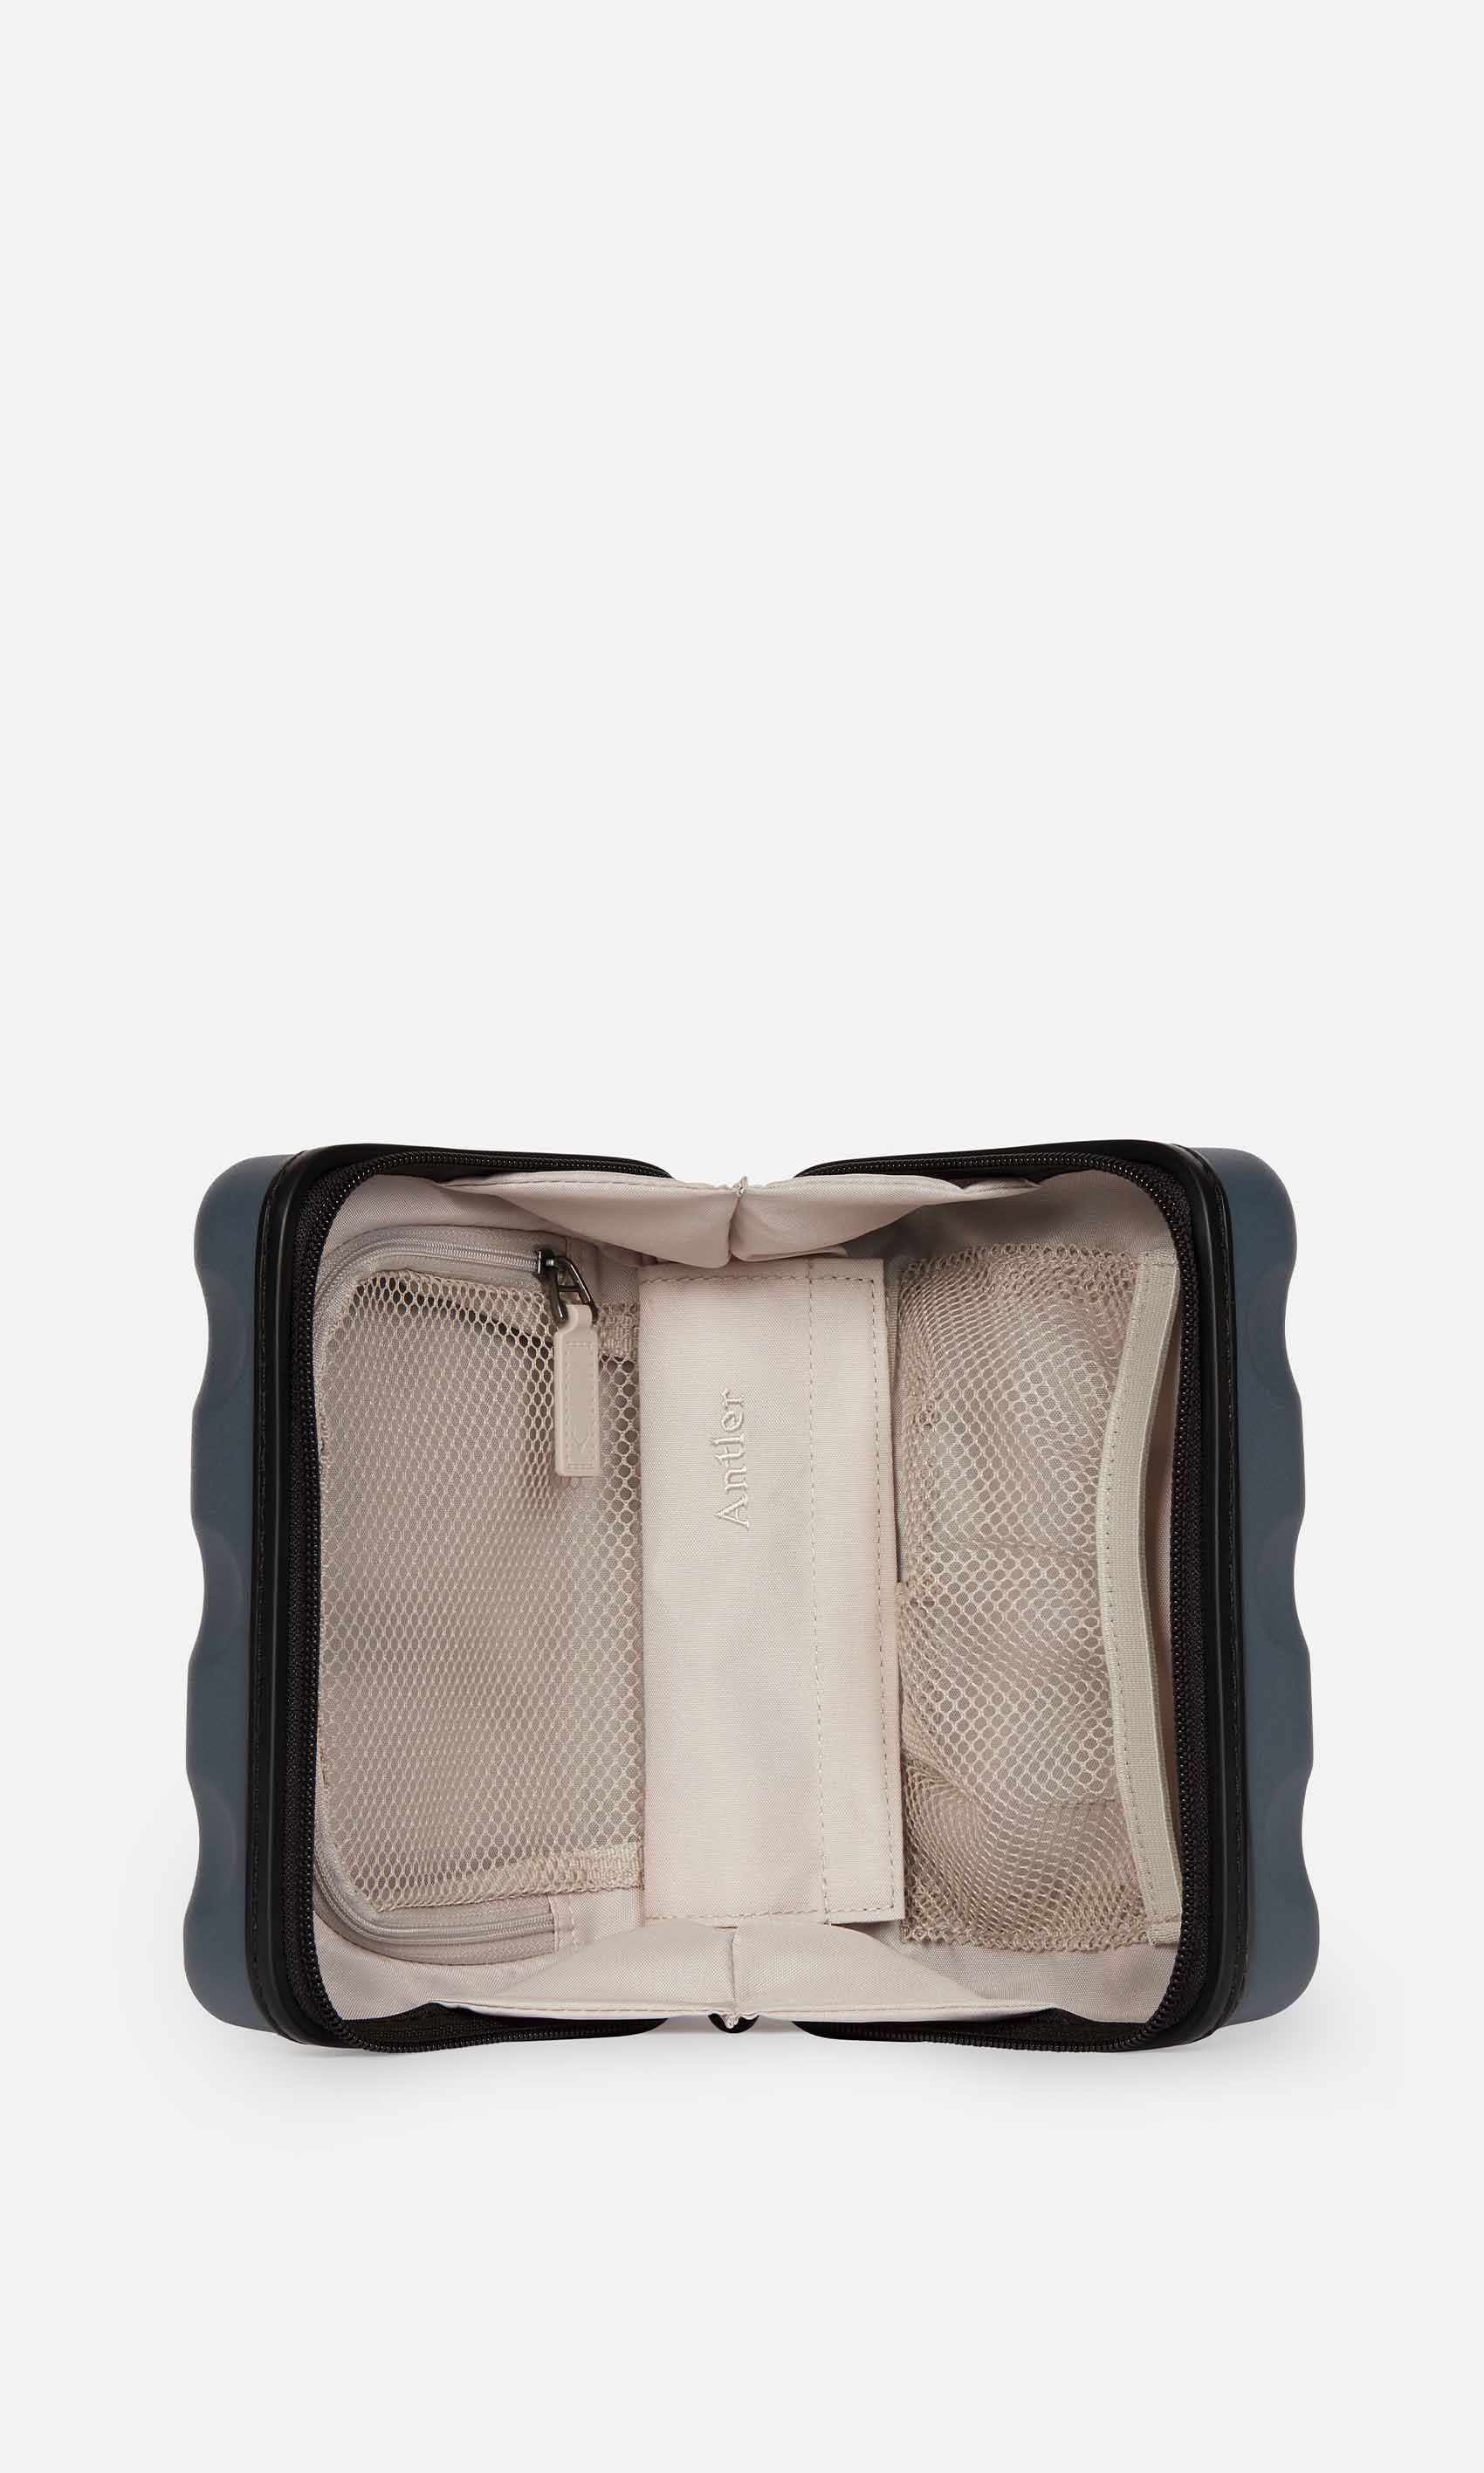 Antler Luggage -  Clifton mini in navy - Hard Suitcases Clifton Mini Case Navy | Travel Gifts & Accessories | Antler